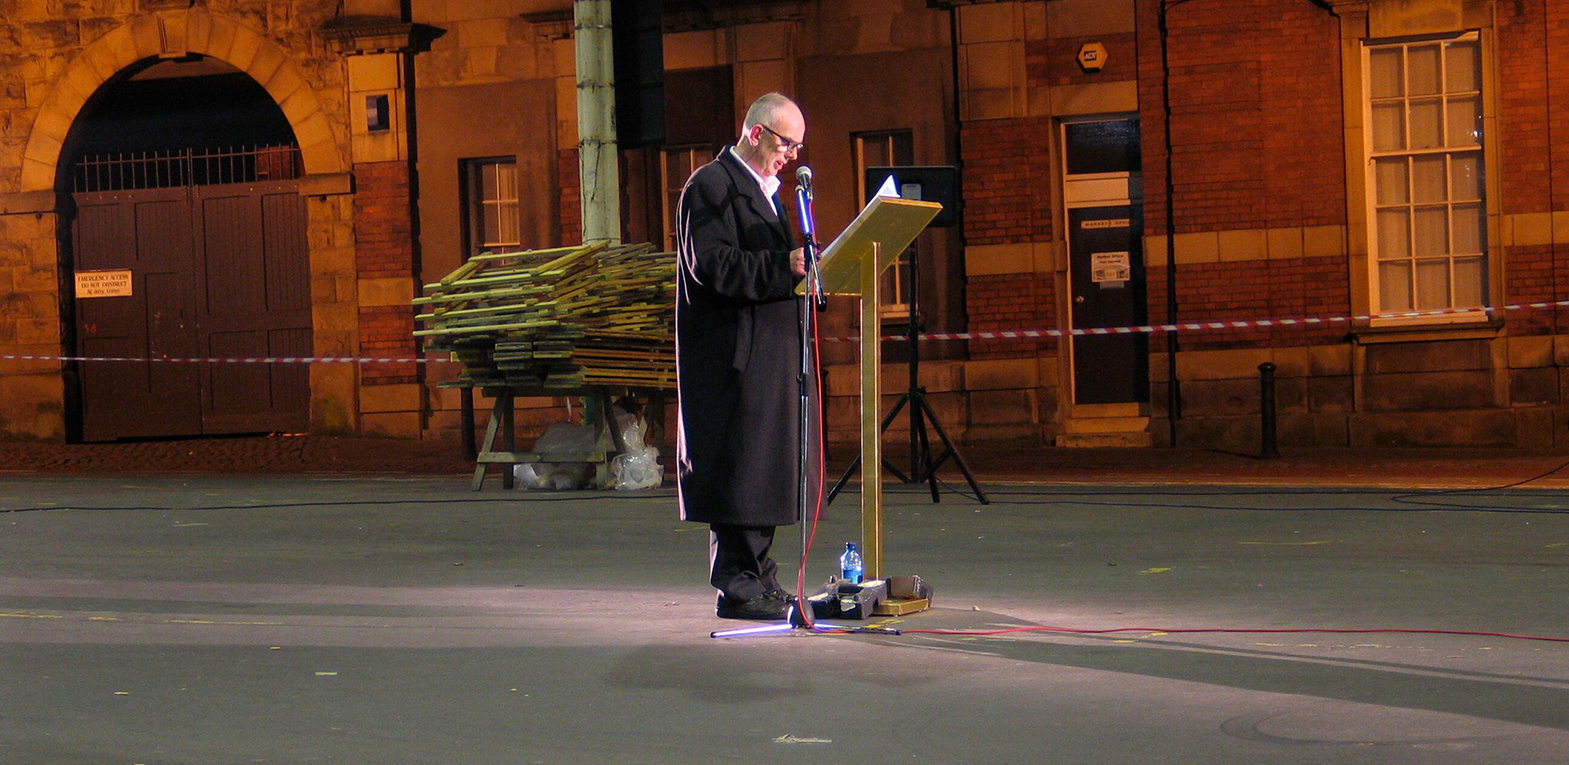 The Preston Market Mystery Project. The artist John Newling delivers a speech while standing at a podium.